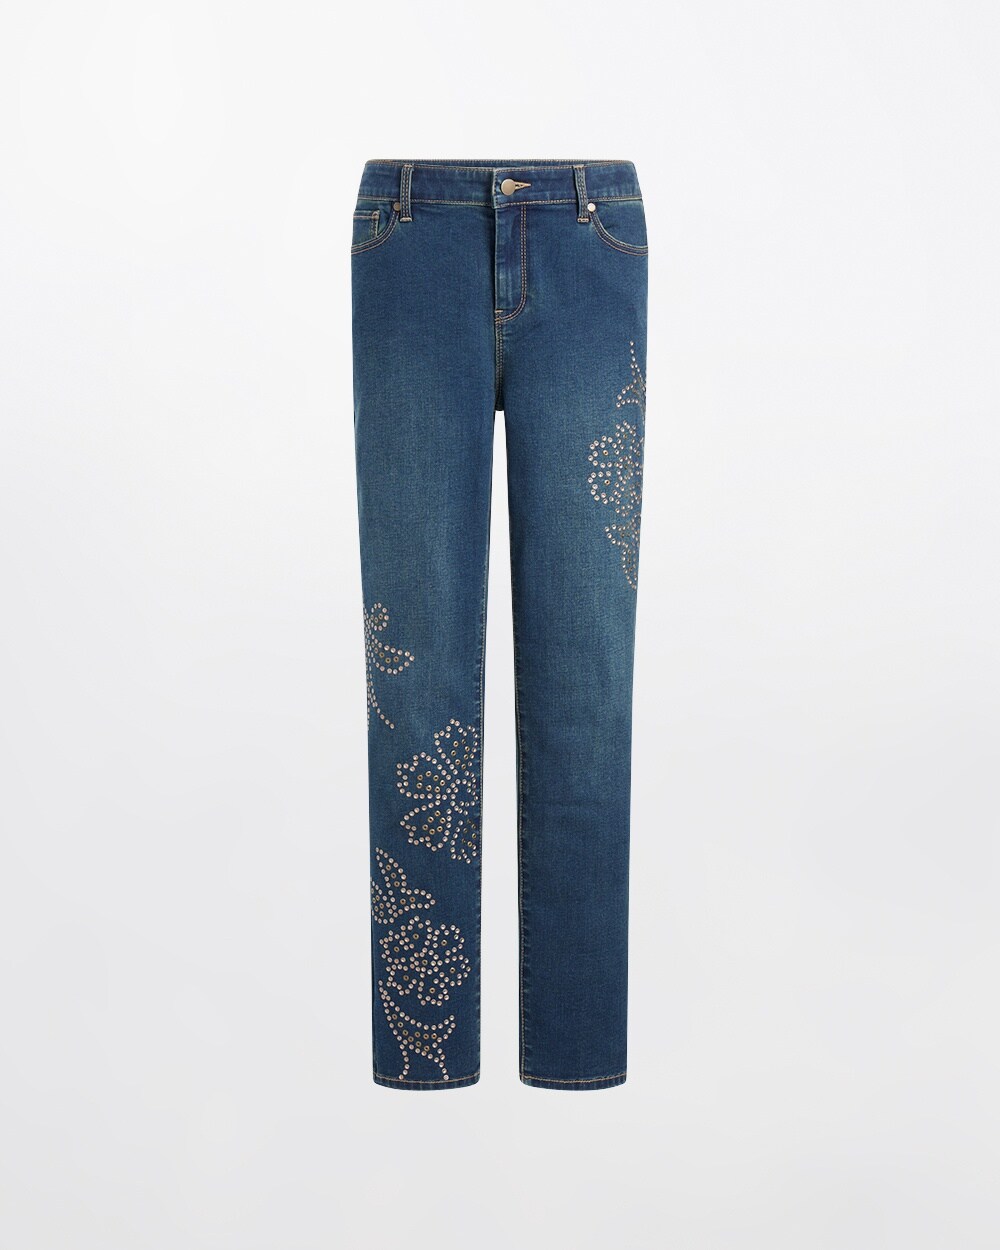 Stud Embellished Perfect Stretch Girlfriend Ankle Jeans